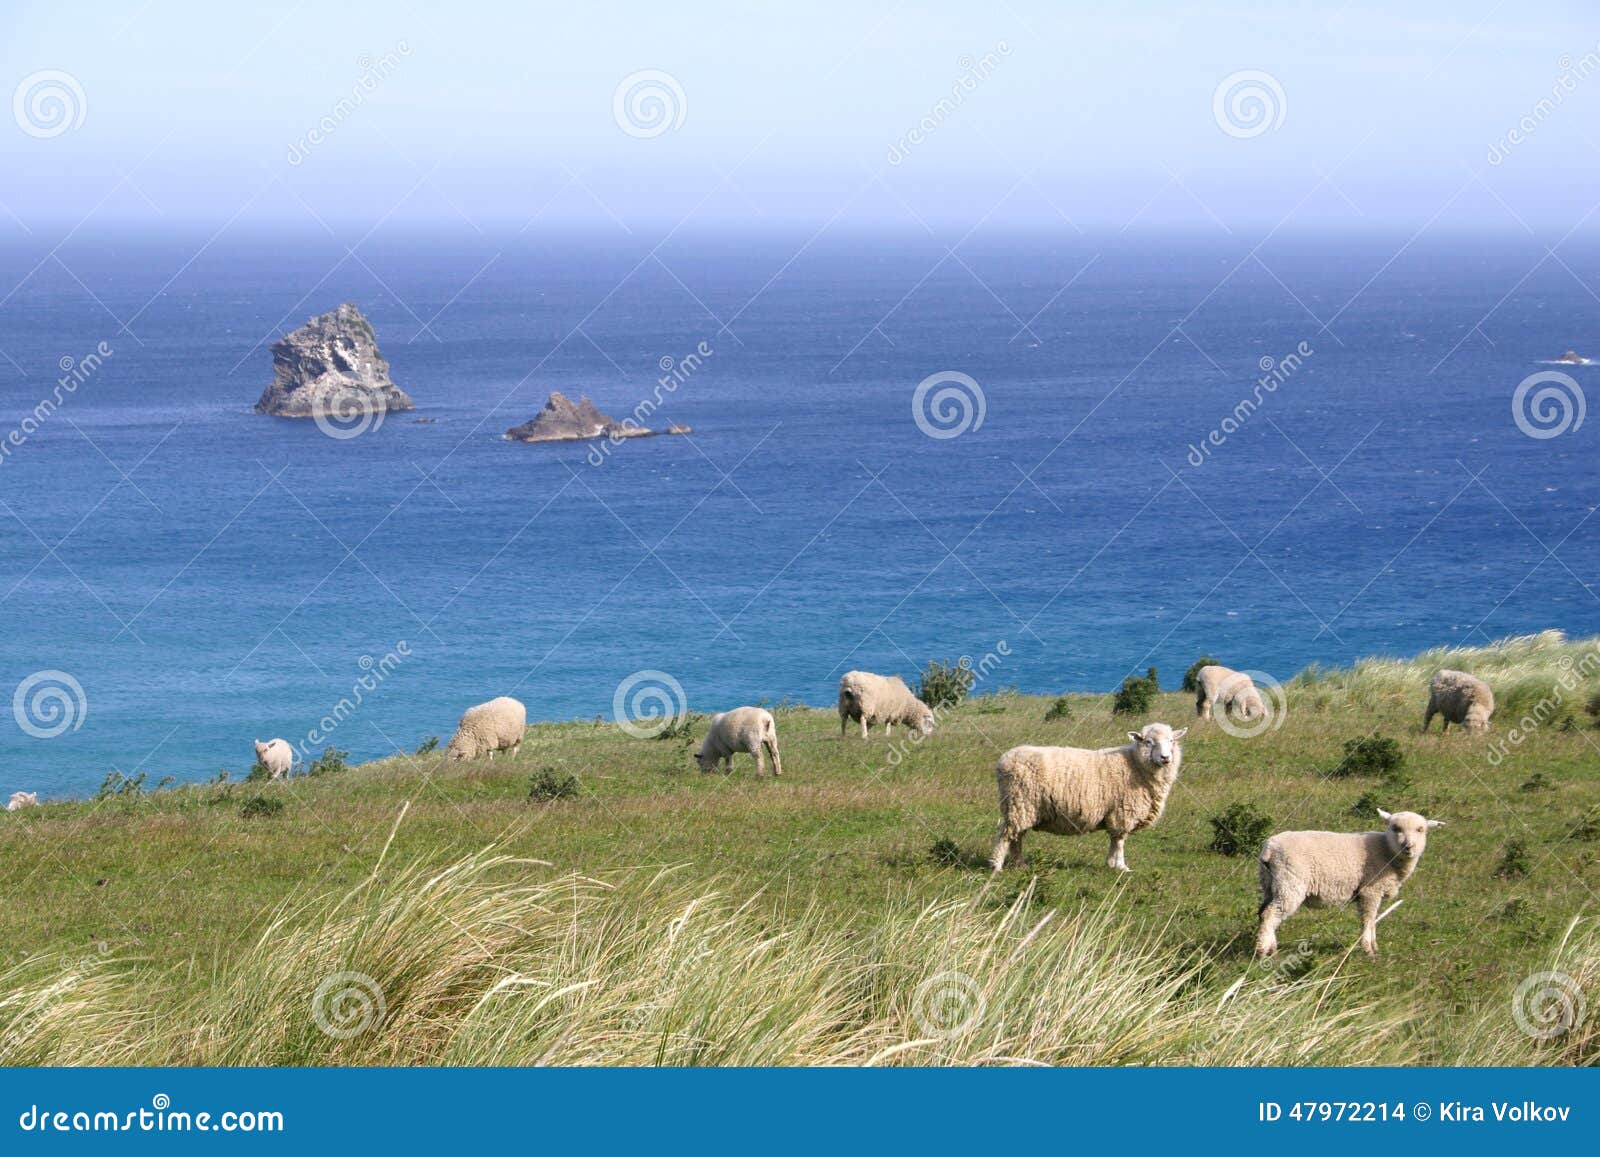 sheep graze on pasture on the cliff, south island, new zealand